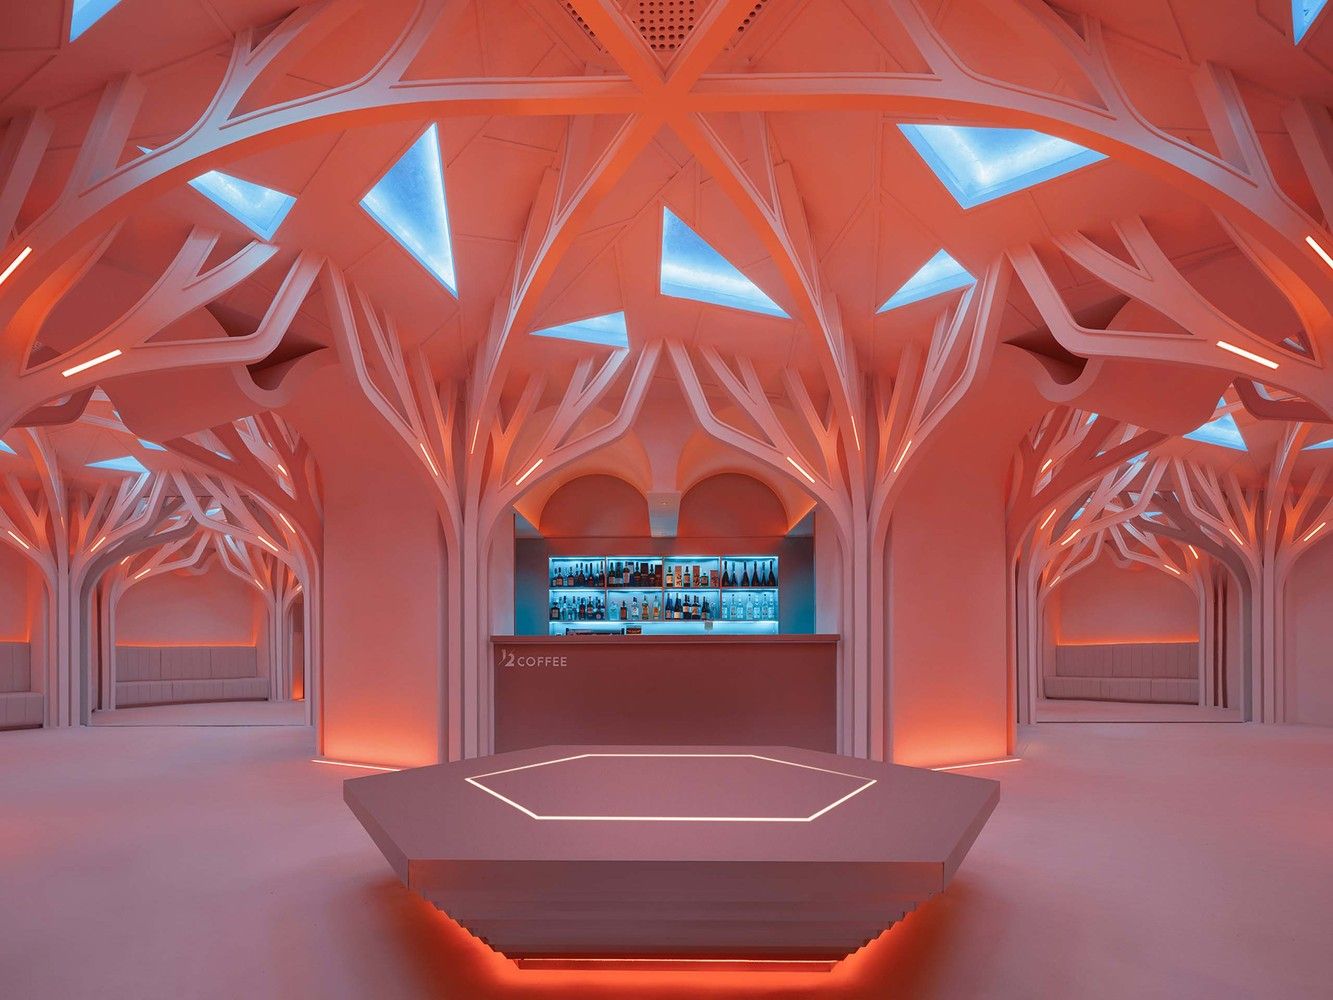 the bar and the hexagonal seating under the parametric ceiling